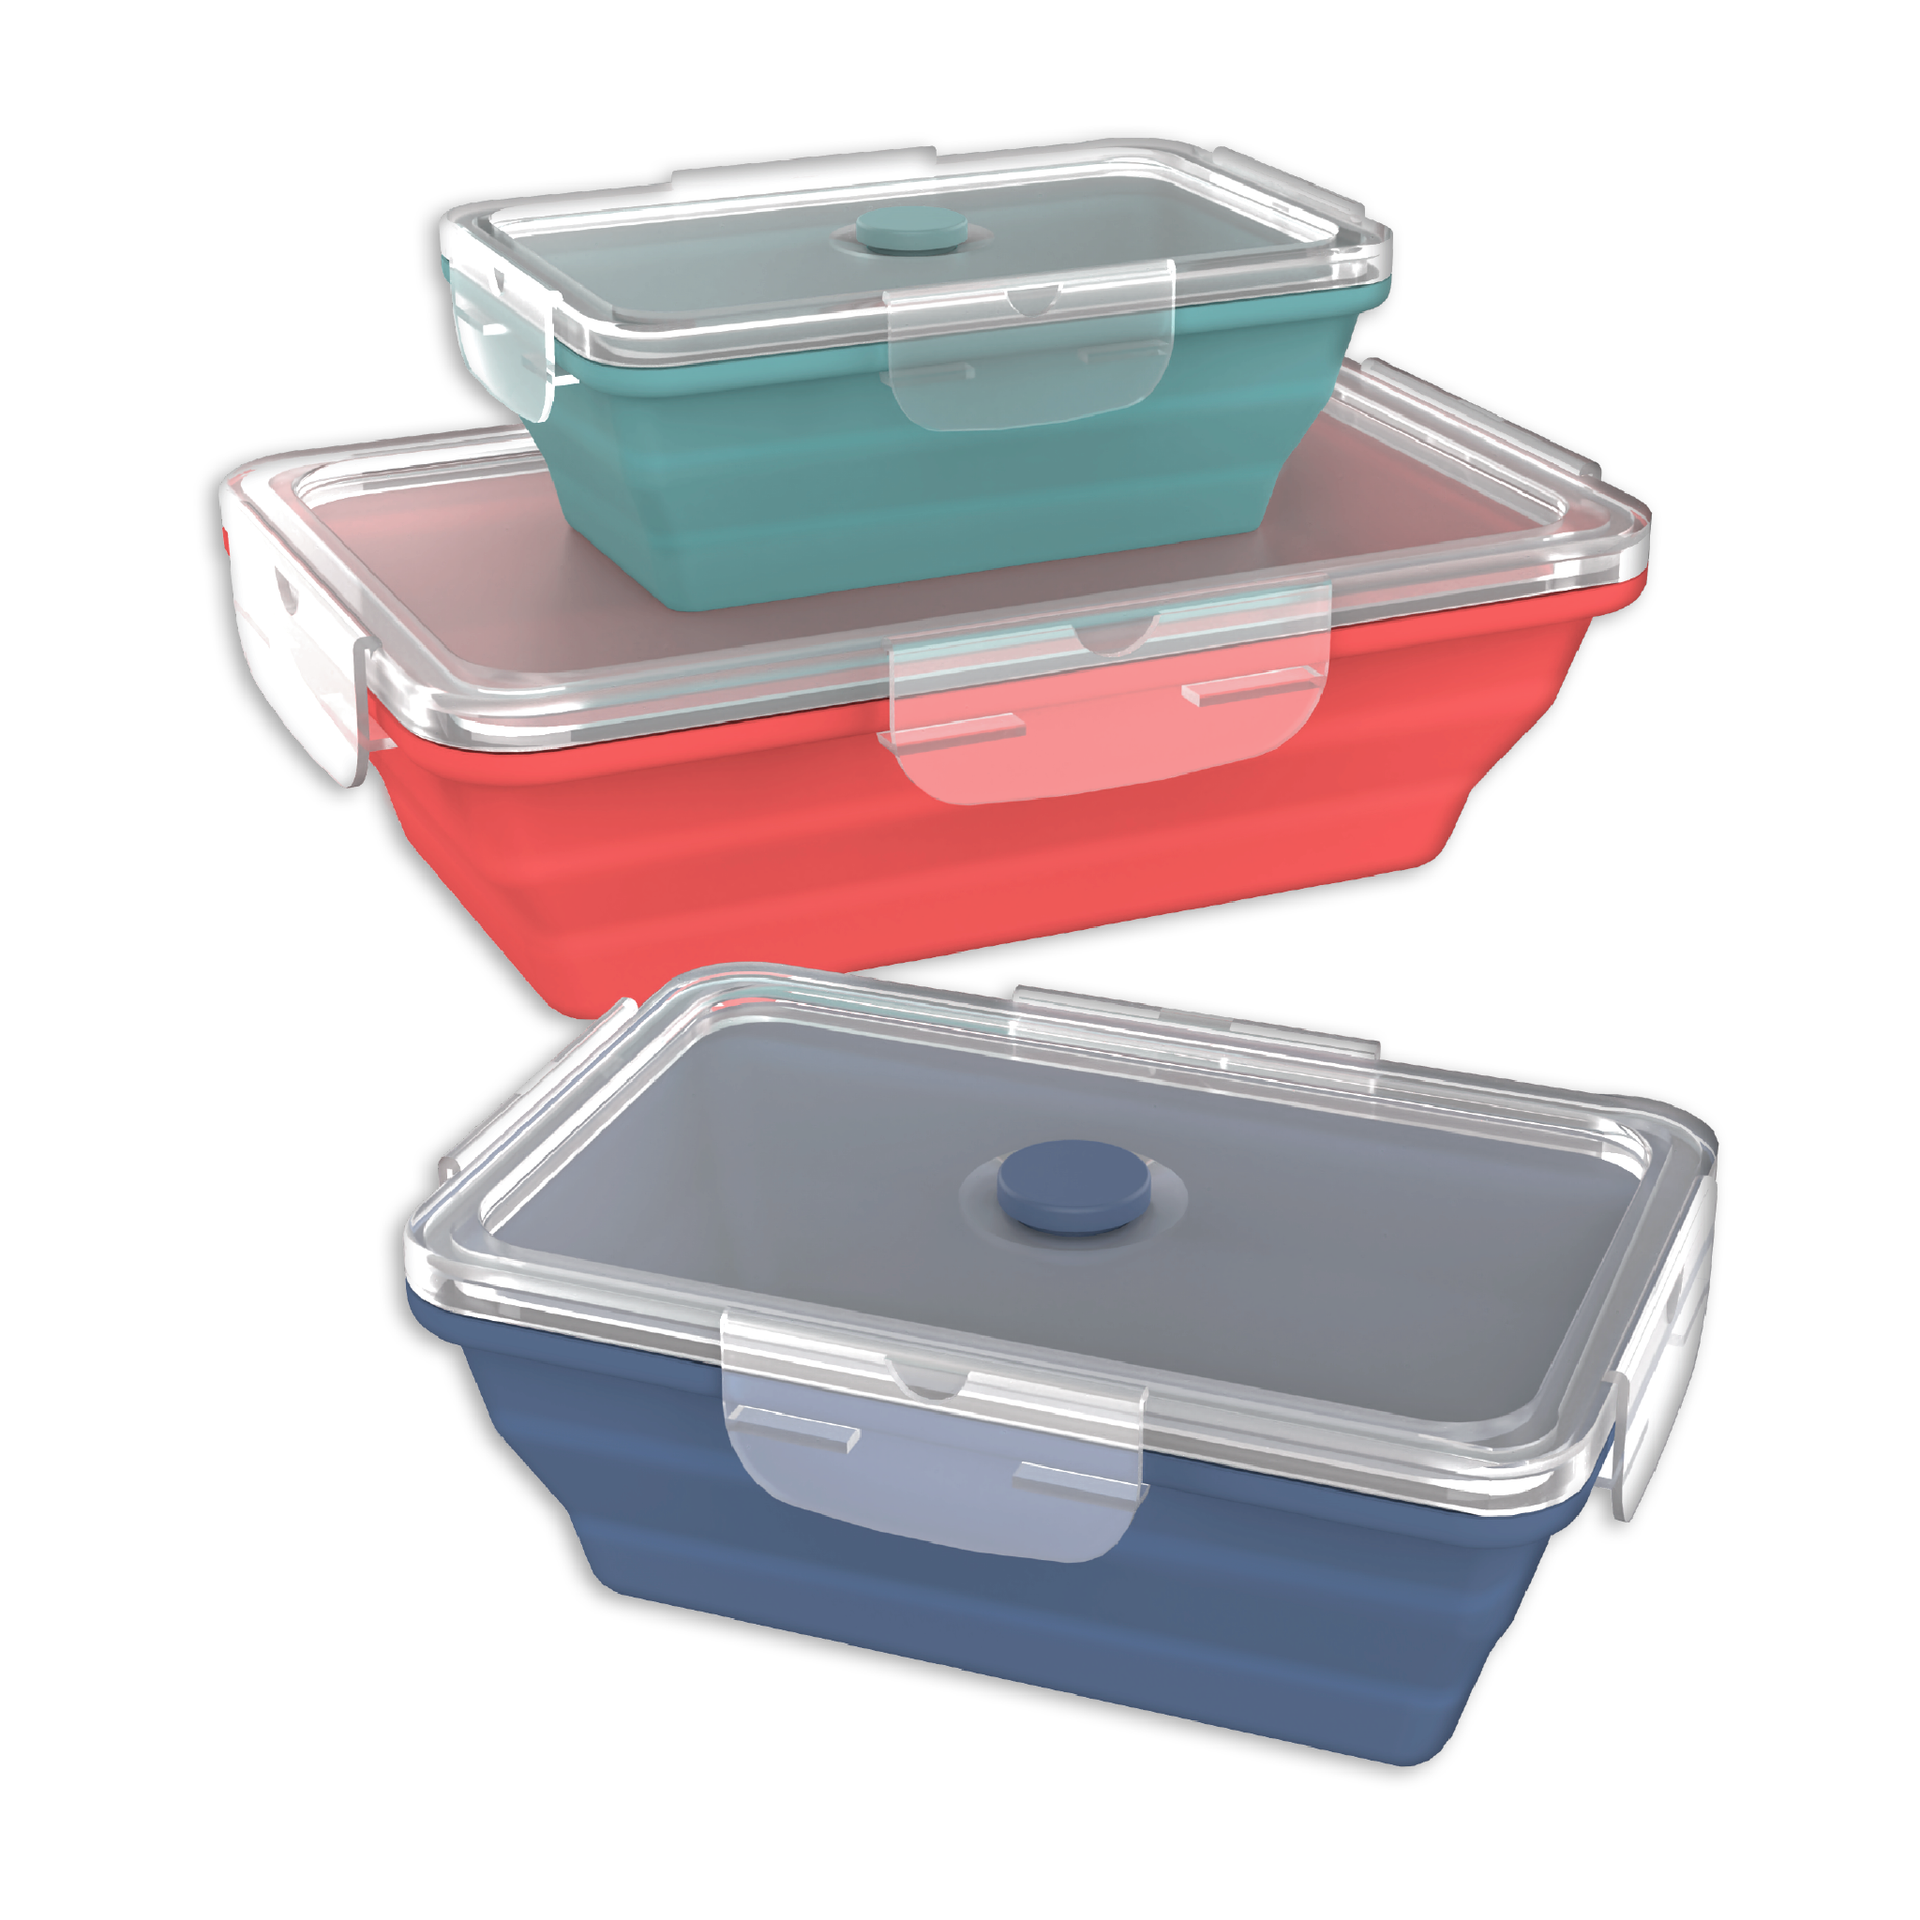  ECOBERI Collapsible Food Storage Containers, Airtight Snap-Top  Lids, Microwave, Dishwasher Safe, BPA Free Silicone, Set of 5: Home &  Kitchen